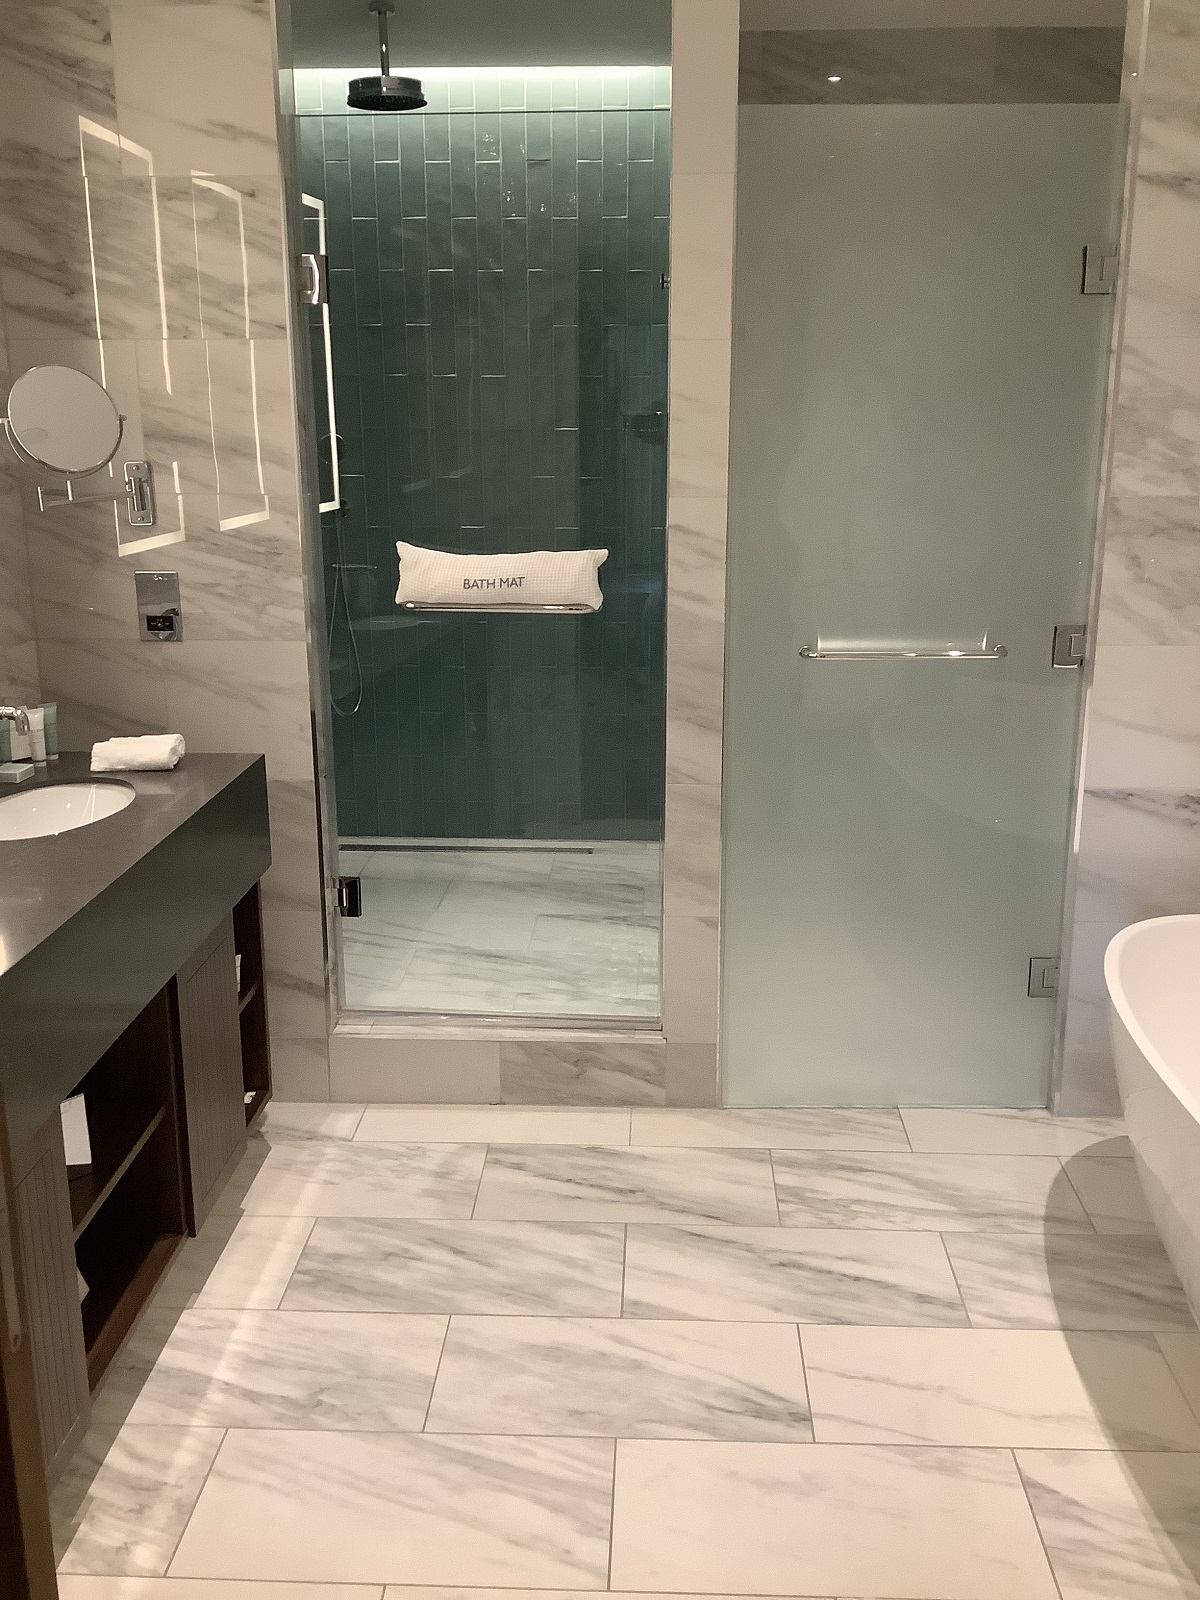 CTD marble effect tiles in the bathroom combines the classic beauty of marble with the modern benefits of anti-slip and anti-baterial technologies